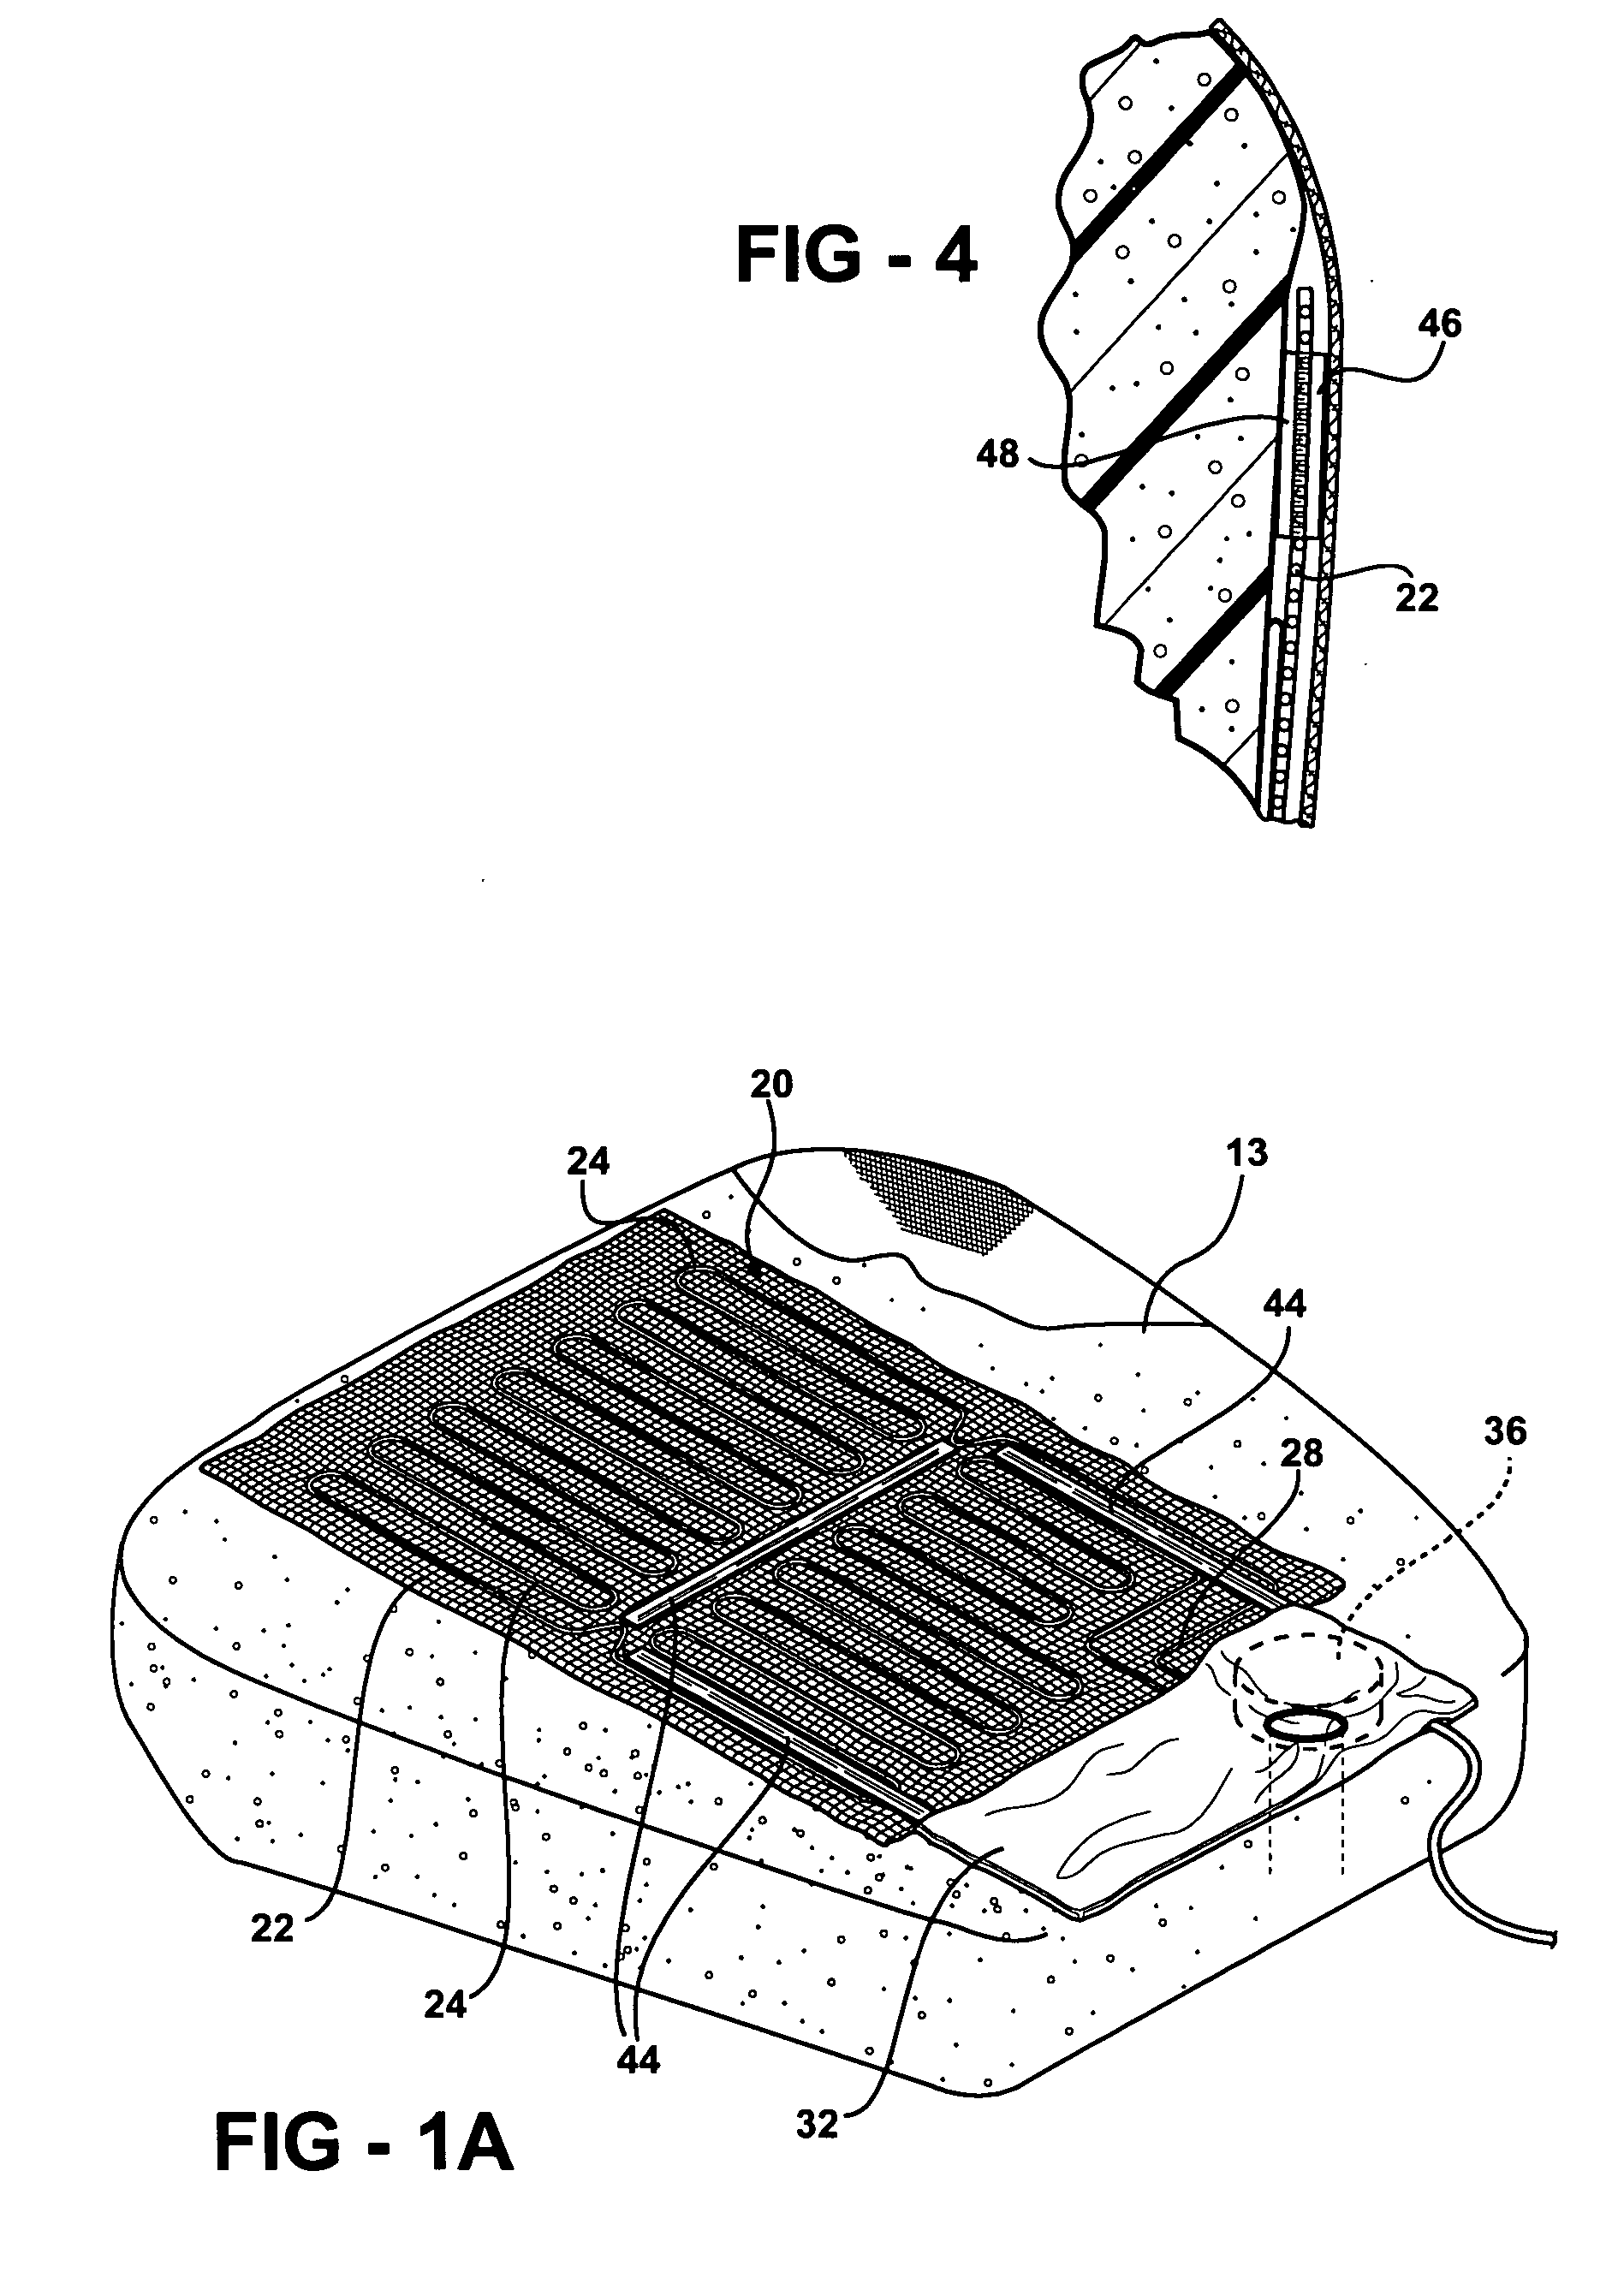 Arrangement and method for providing an air flow within an upholstered seat